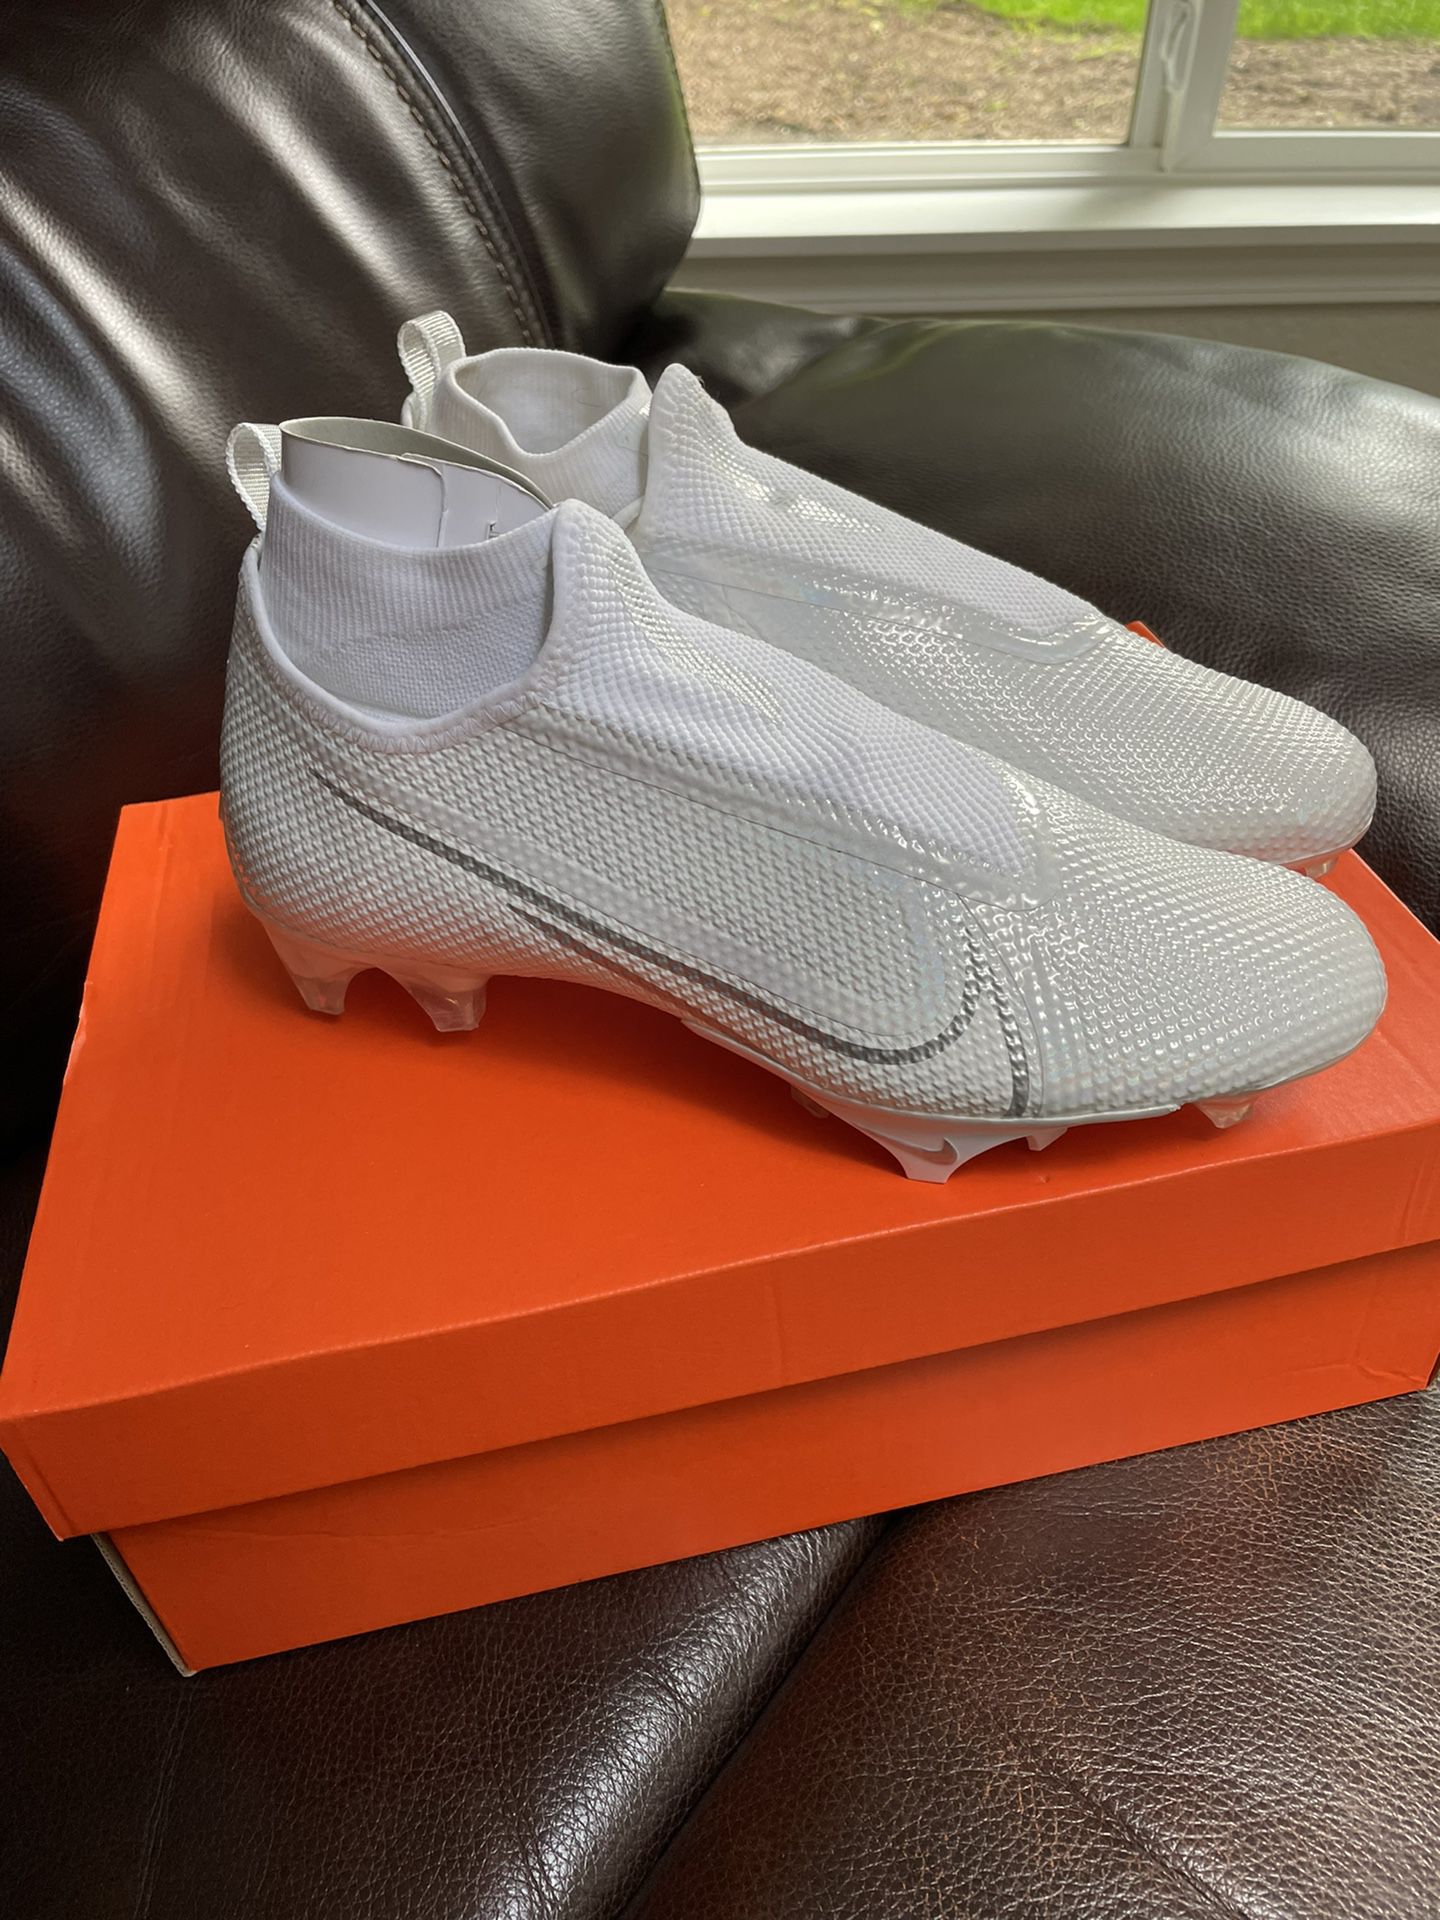 Gucci Adidas Football Cleats for Sale in Portland, OR - OfferUp